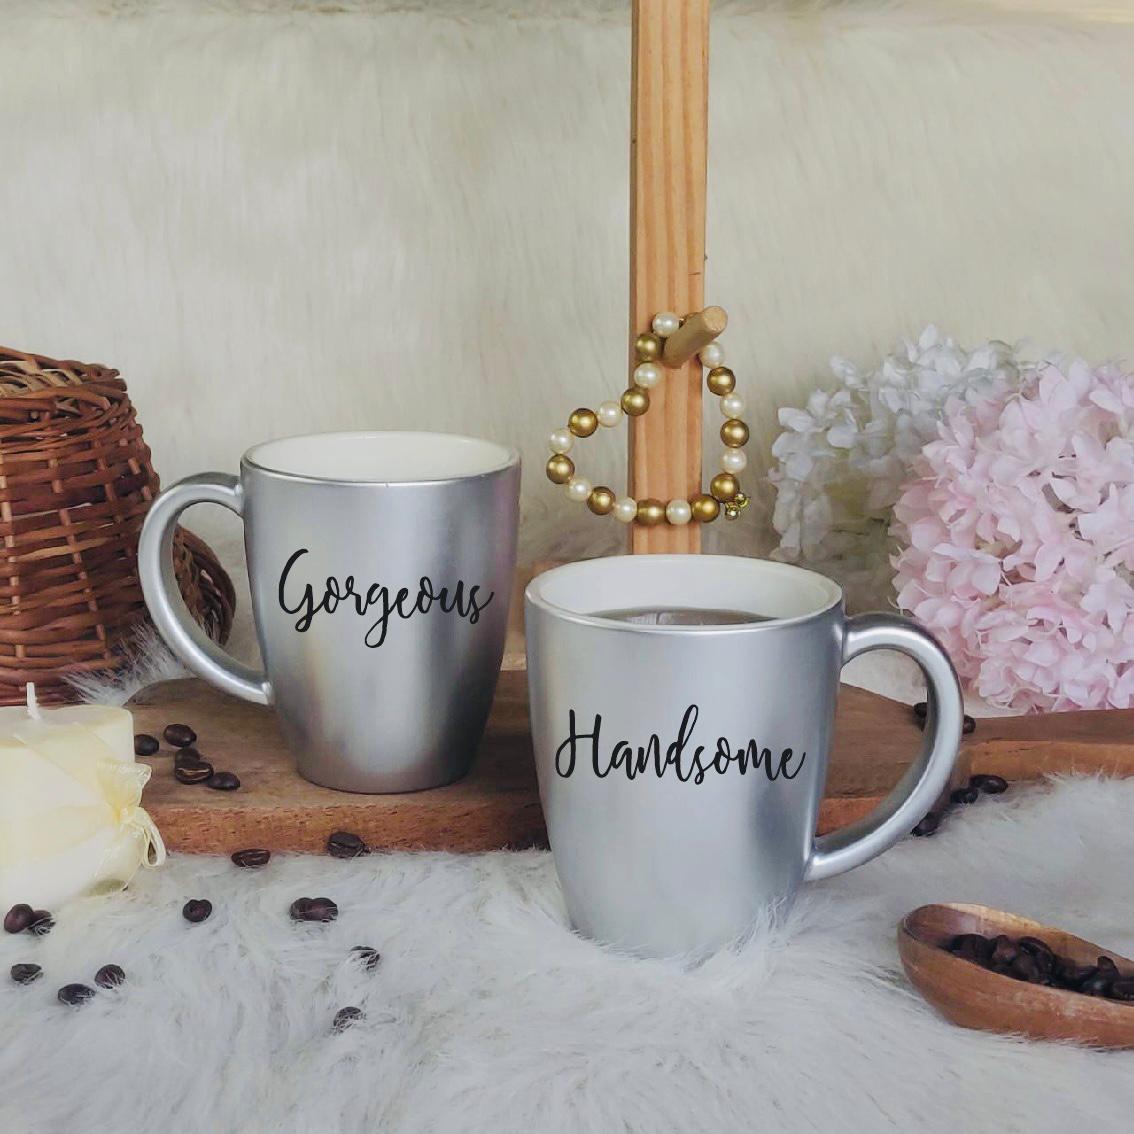 Unbreakable Couple Mugs - Gorgeous and Handsome - Set of 2 - Silver